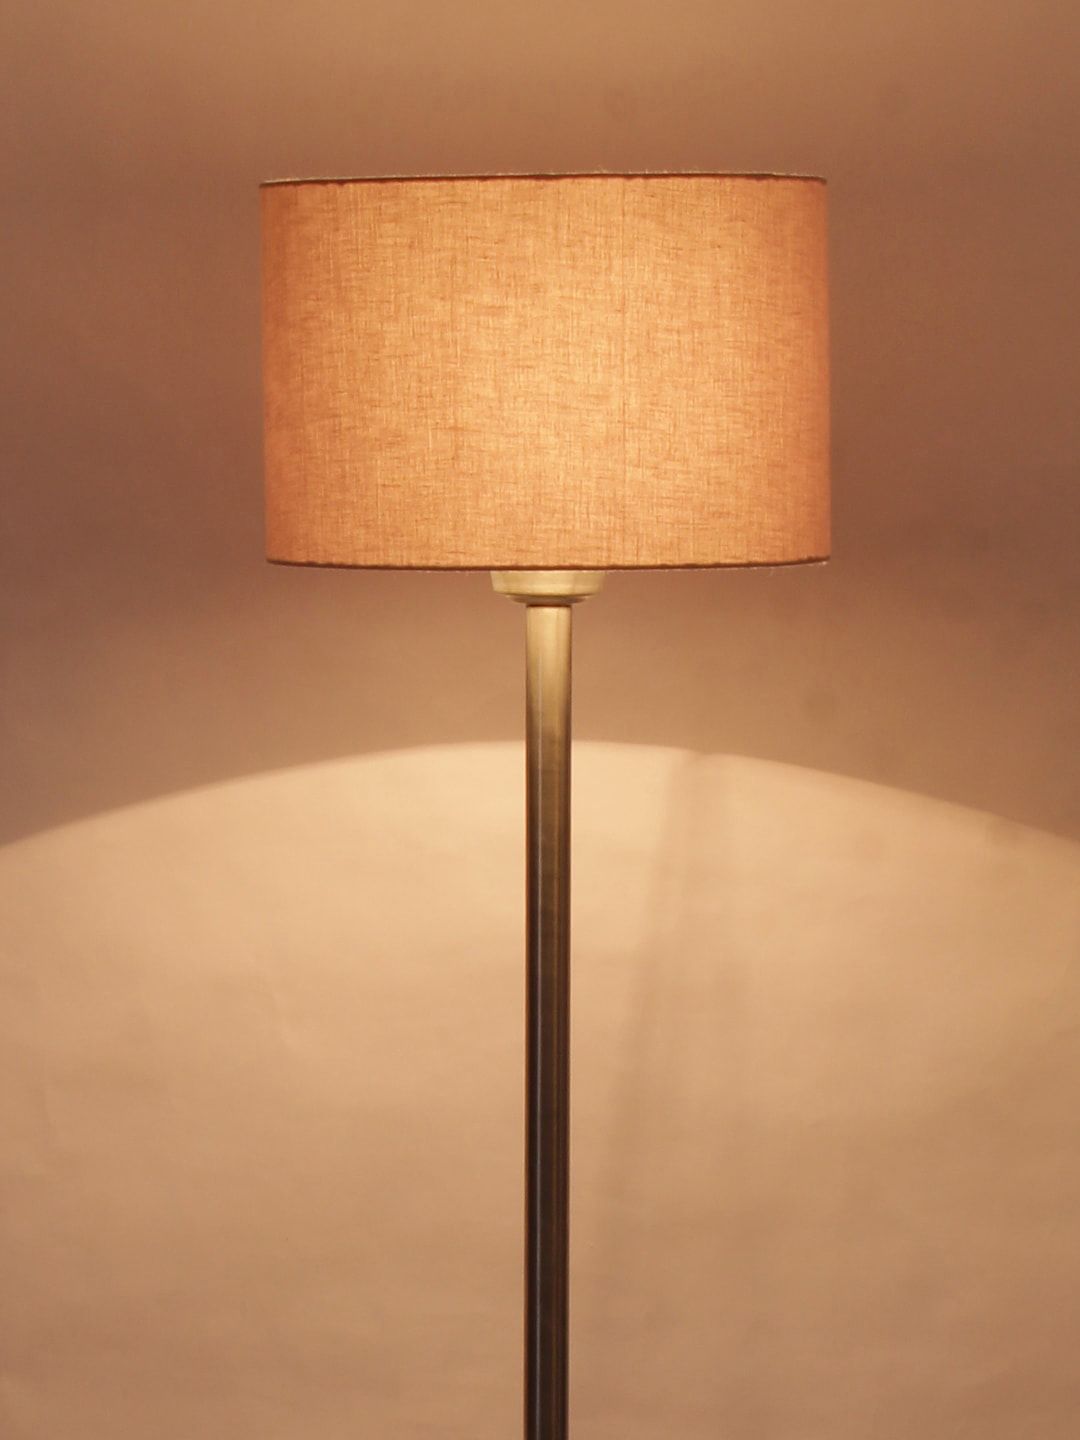 Devansh Grey Cylindrical Floor Lamp with Shade Price in India